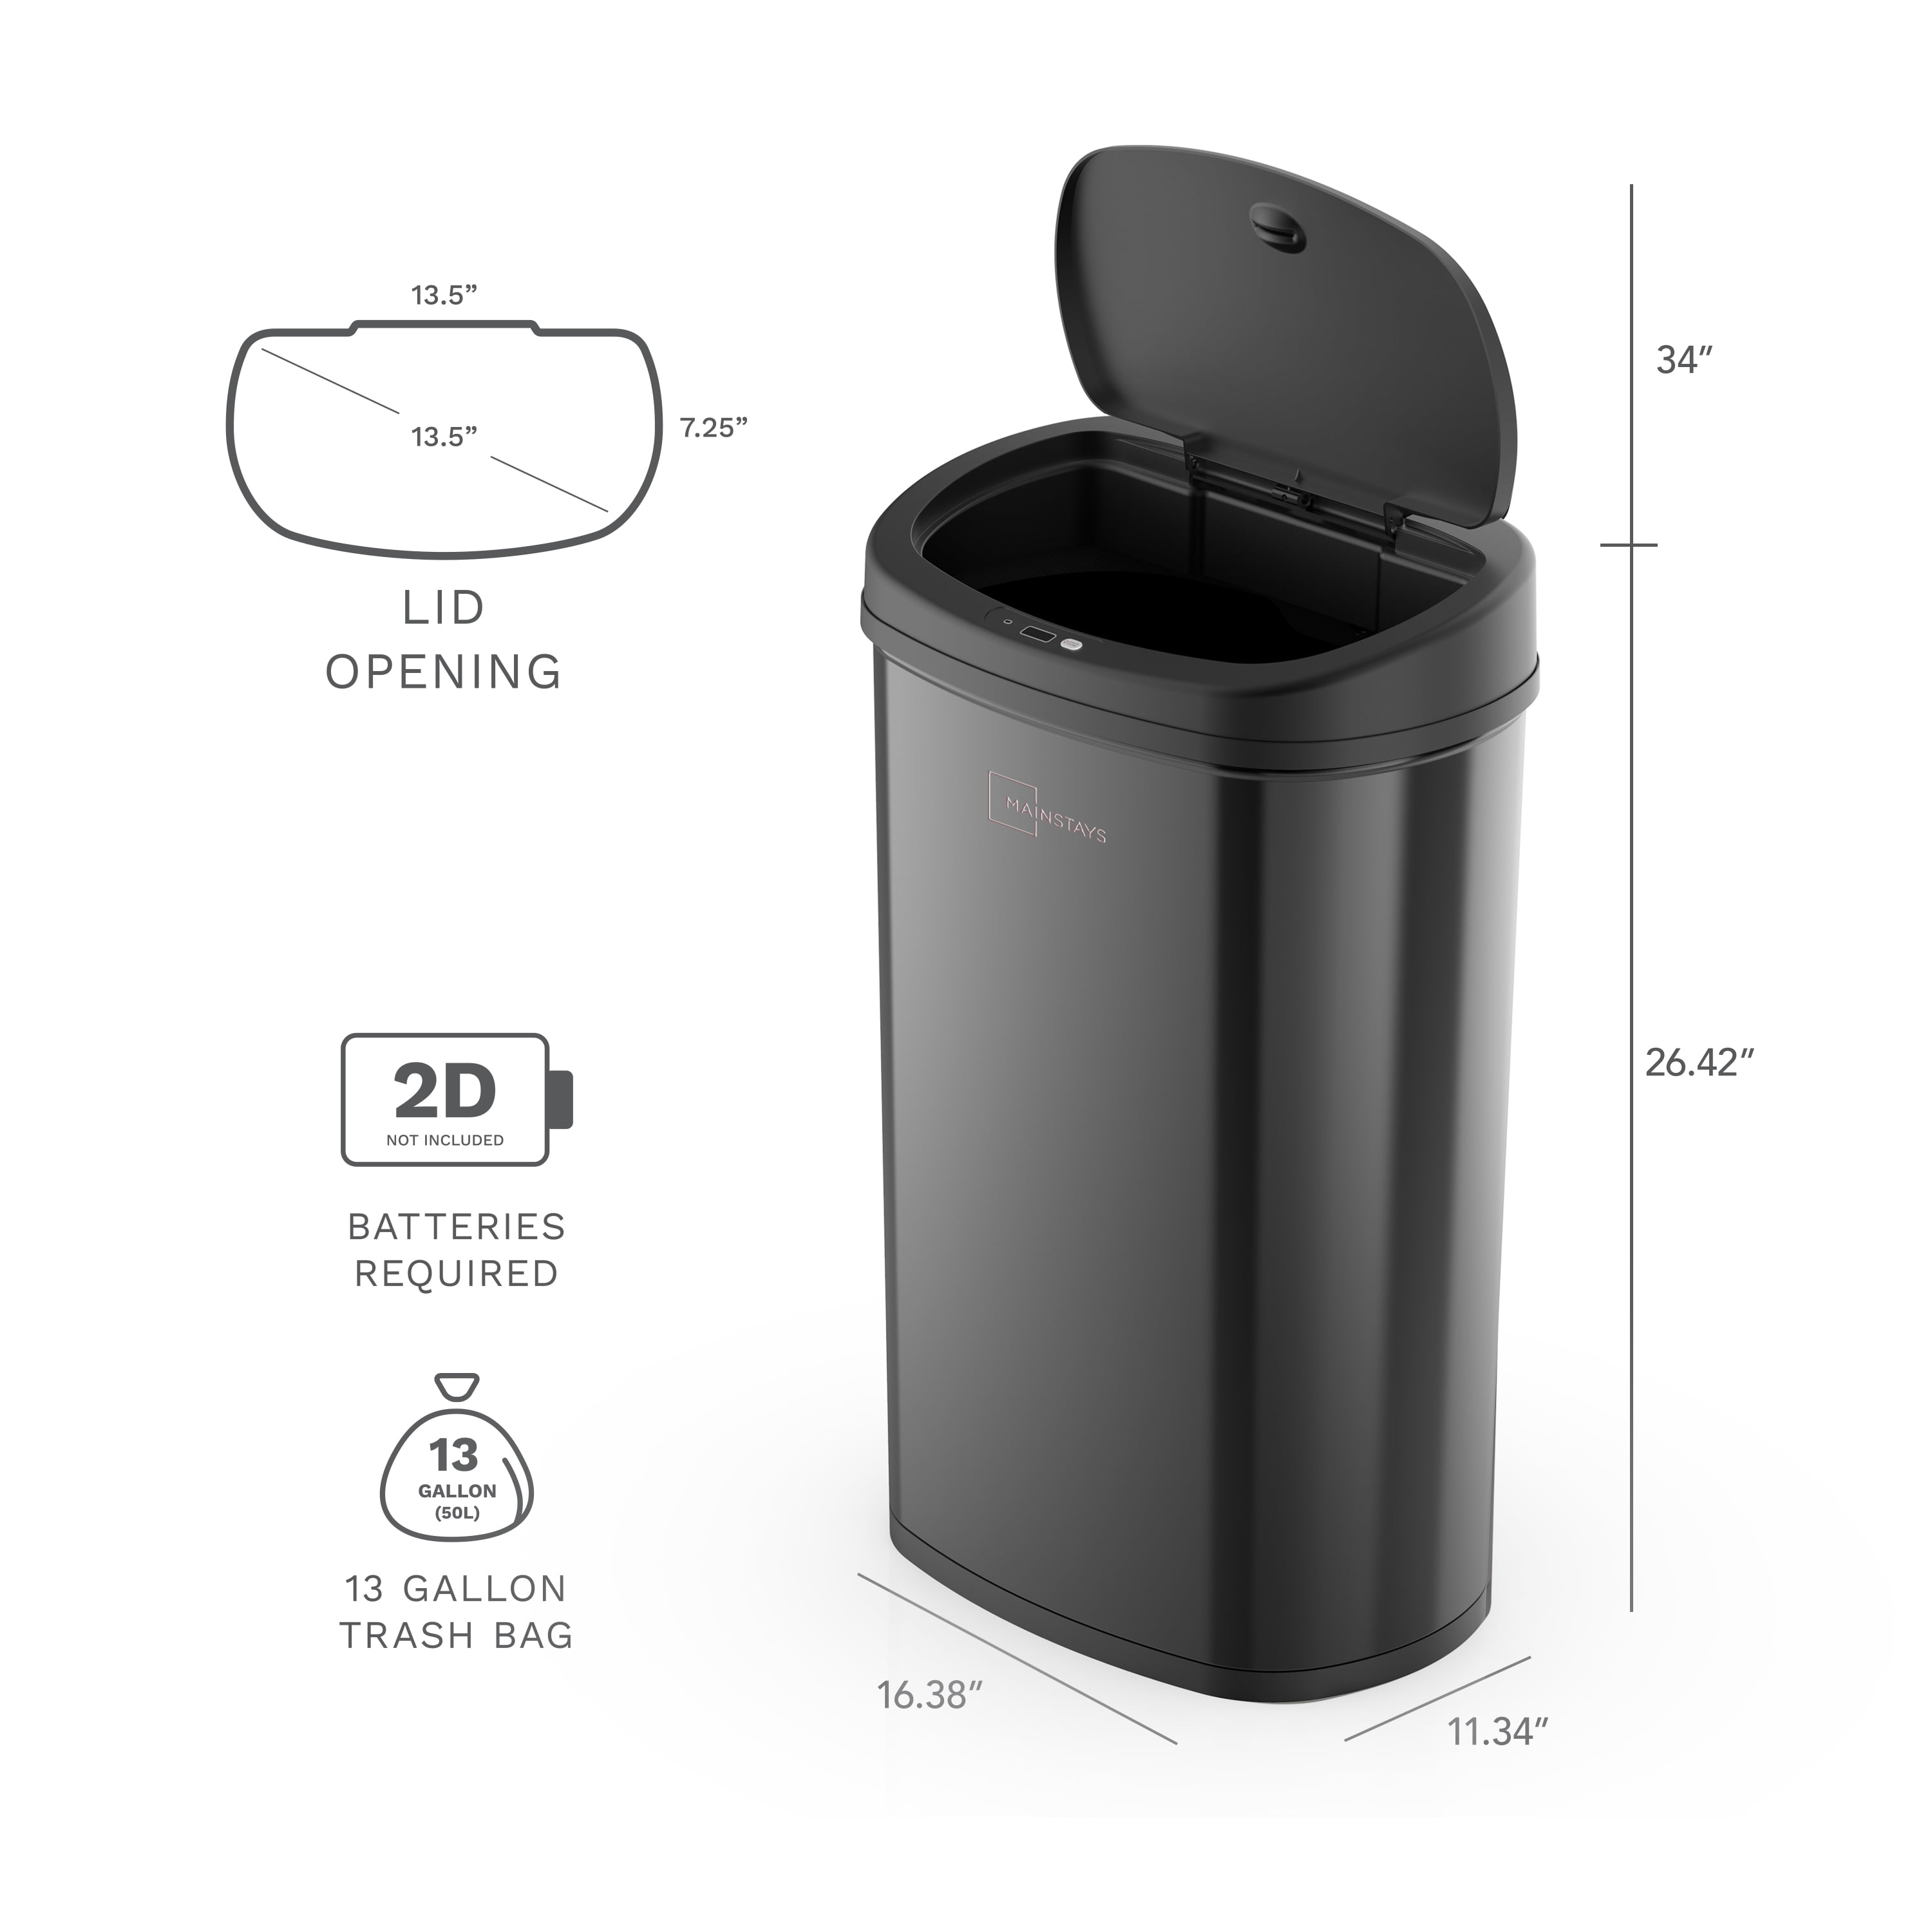  GINMAON Automatic Trash Can 13 Gallon Garbage Can with